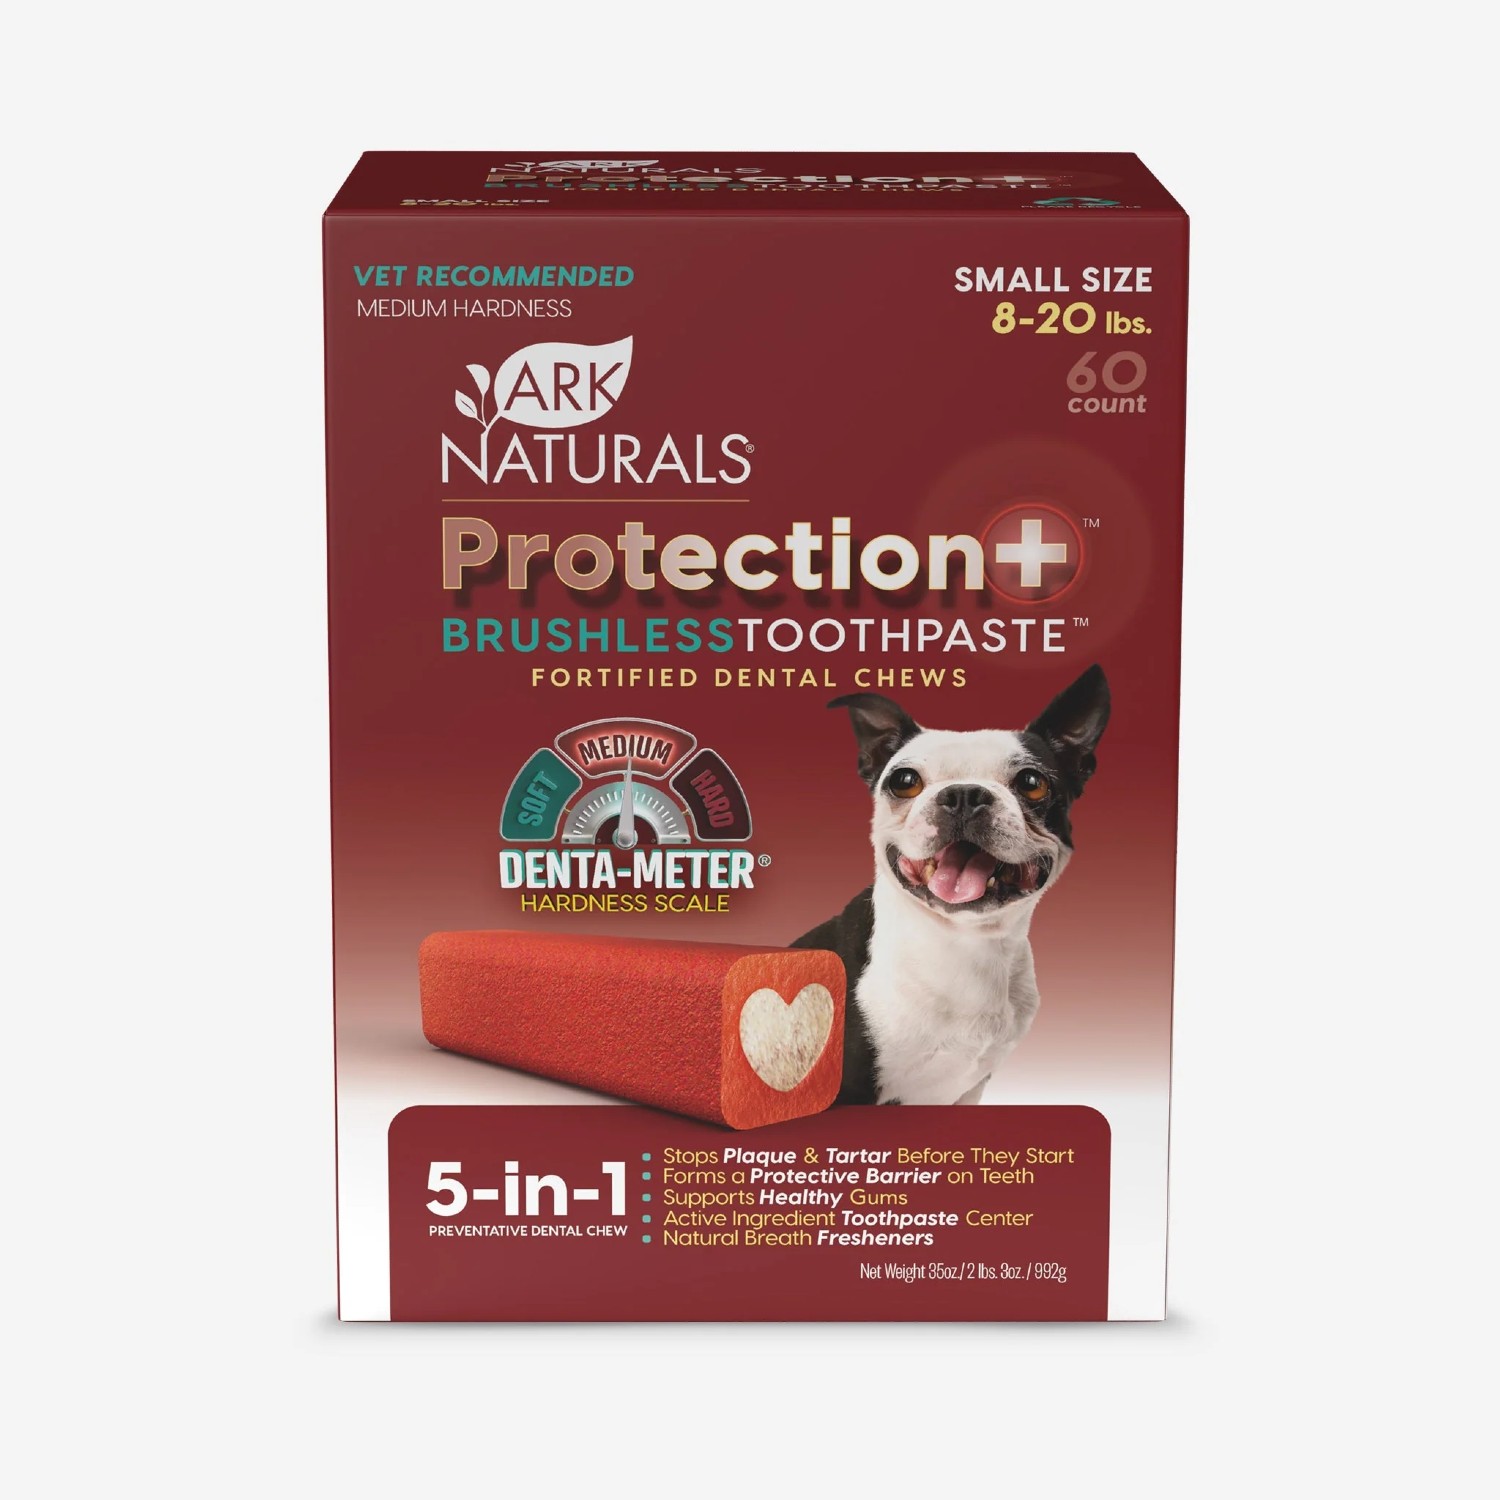 Ark Naturals Protection+ Brushless Toothpaste Fortified Dental Dog Chews - Value Pack